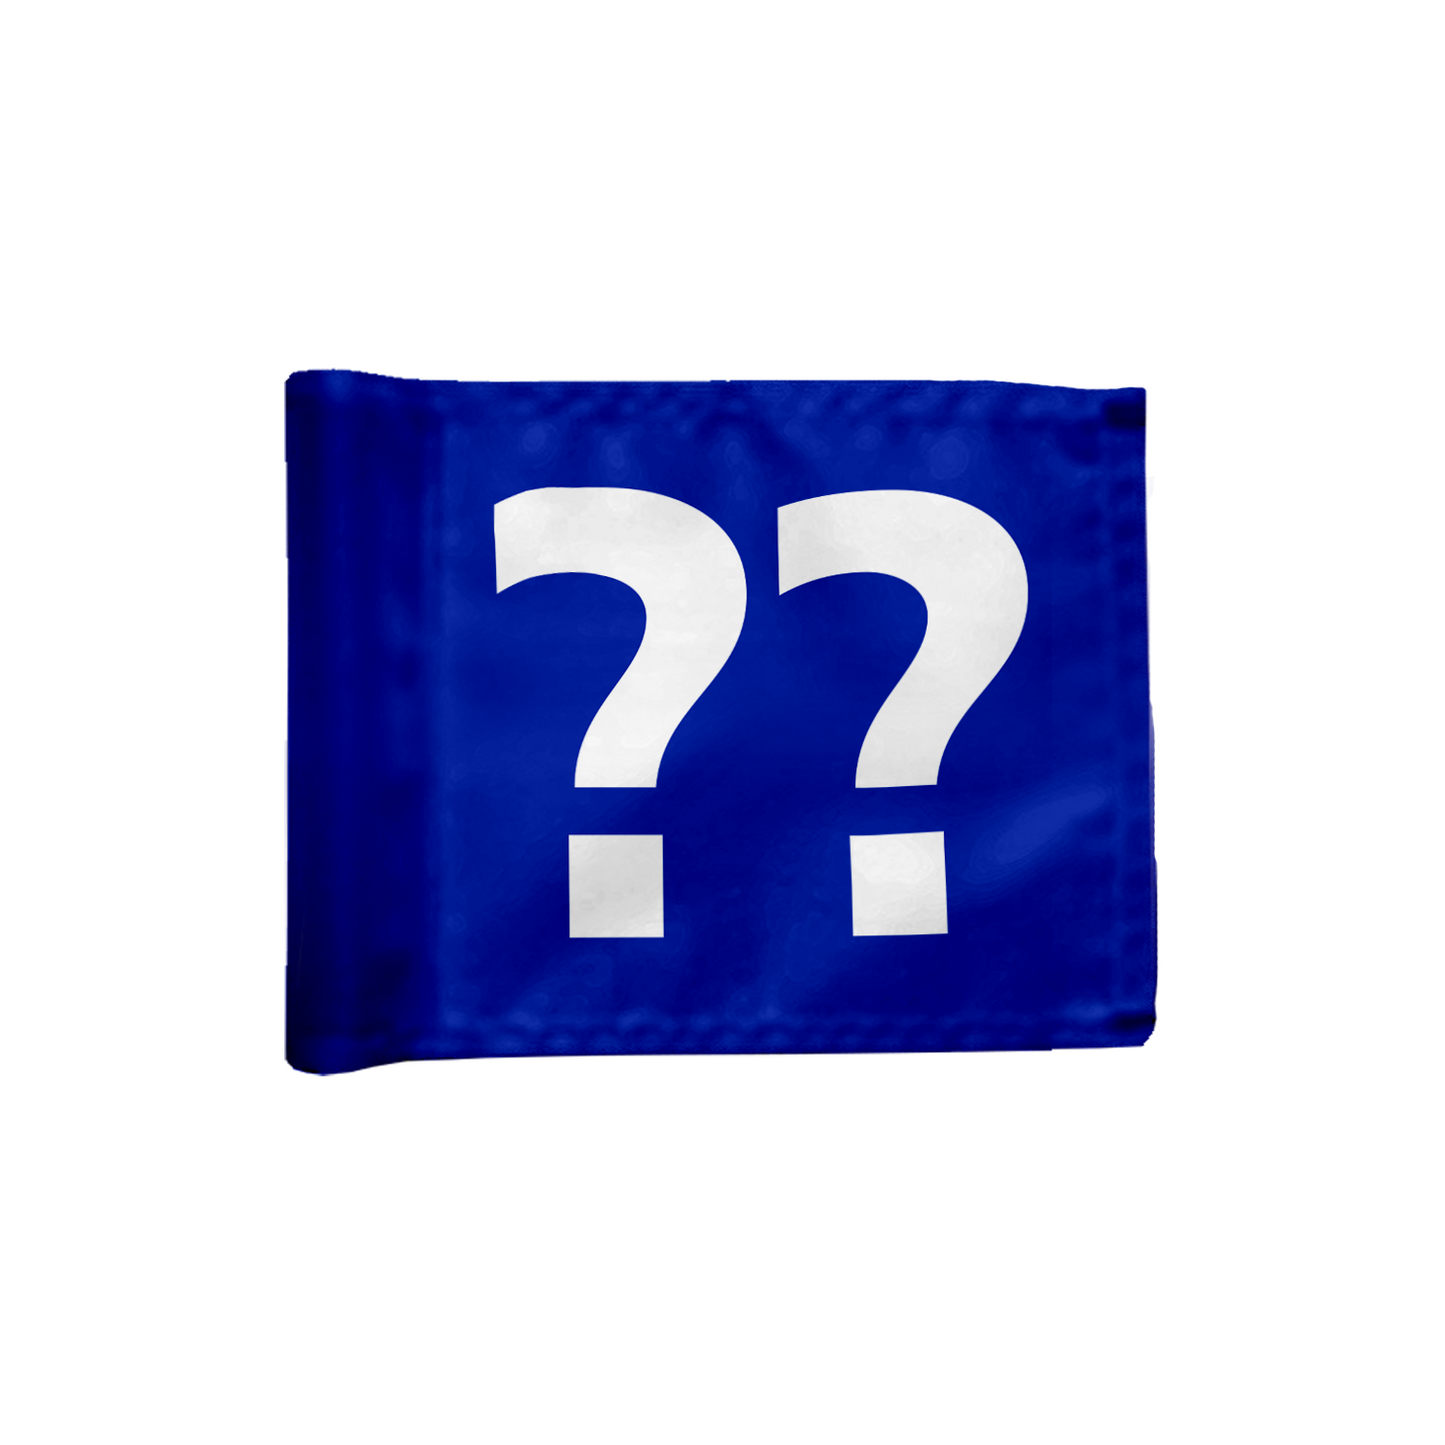 Single puttinggreen flag, one-sided, blue with optional hole number, 200 gram fabric